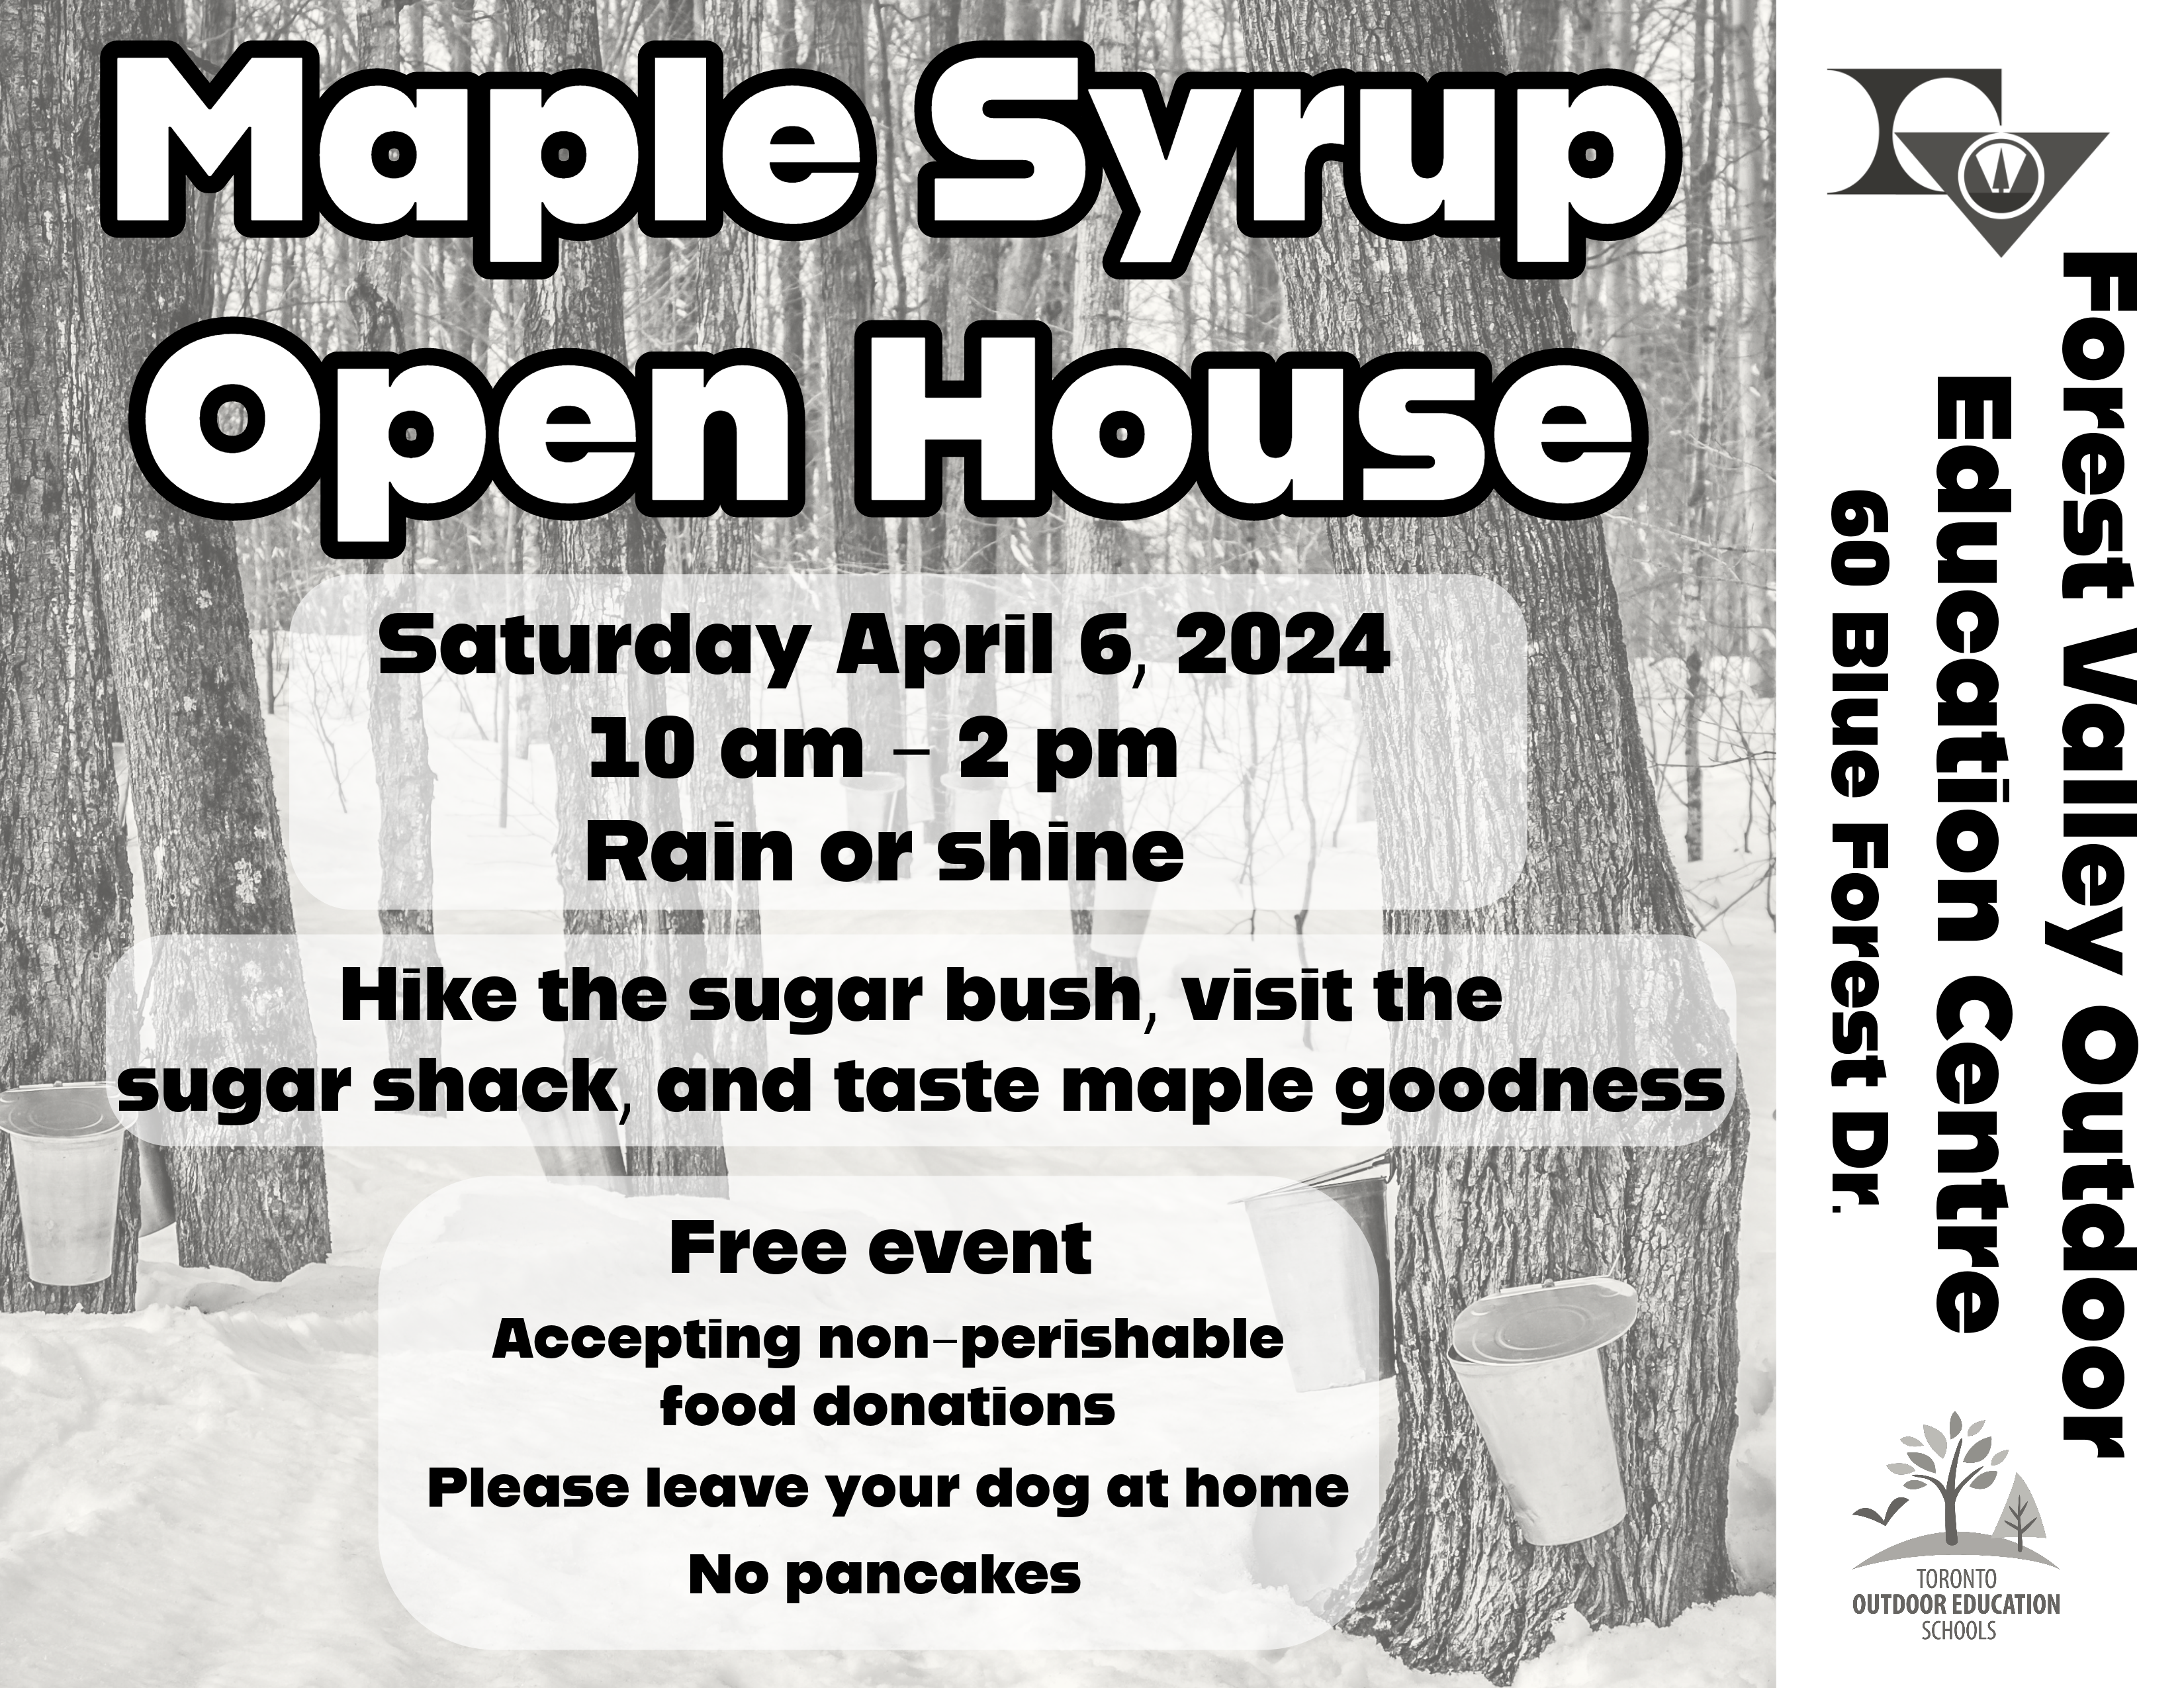 Maple syrup open house (1)